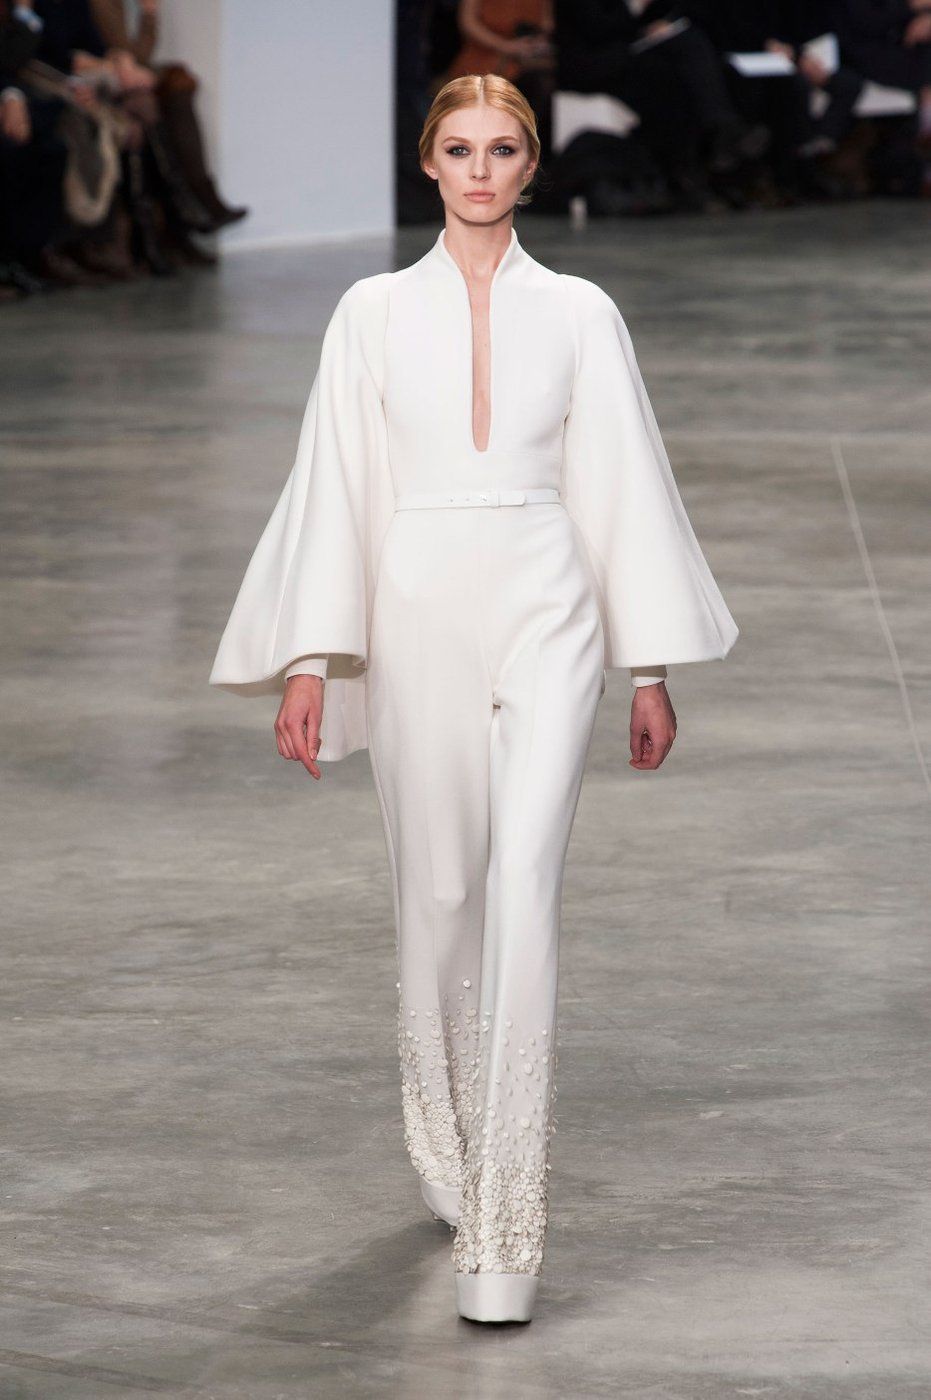 Stephane Rolland Haute Couture Spring/Summer 2013 collection | Fab ...